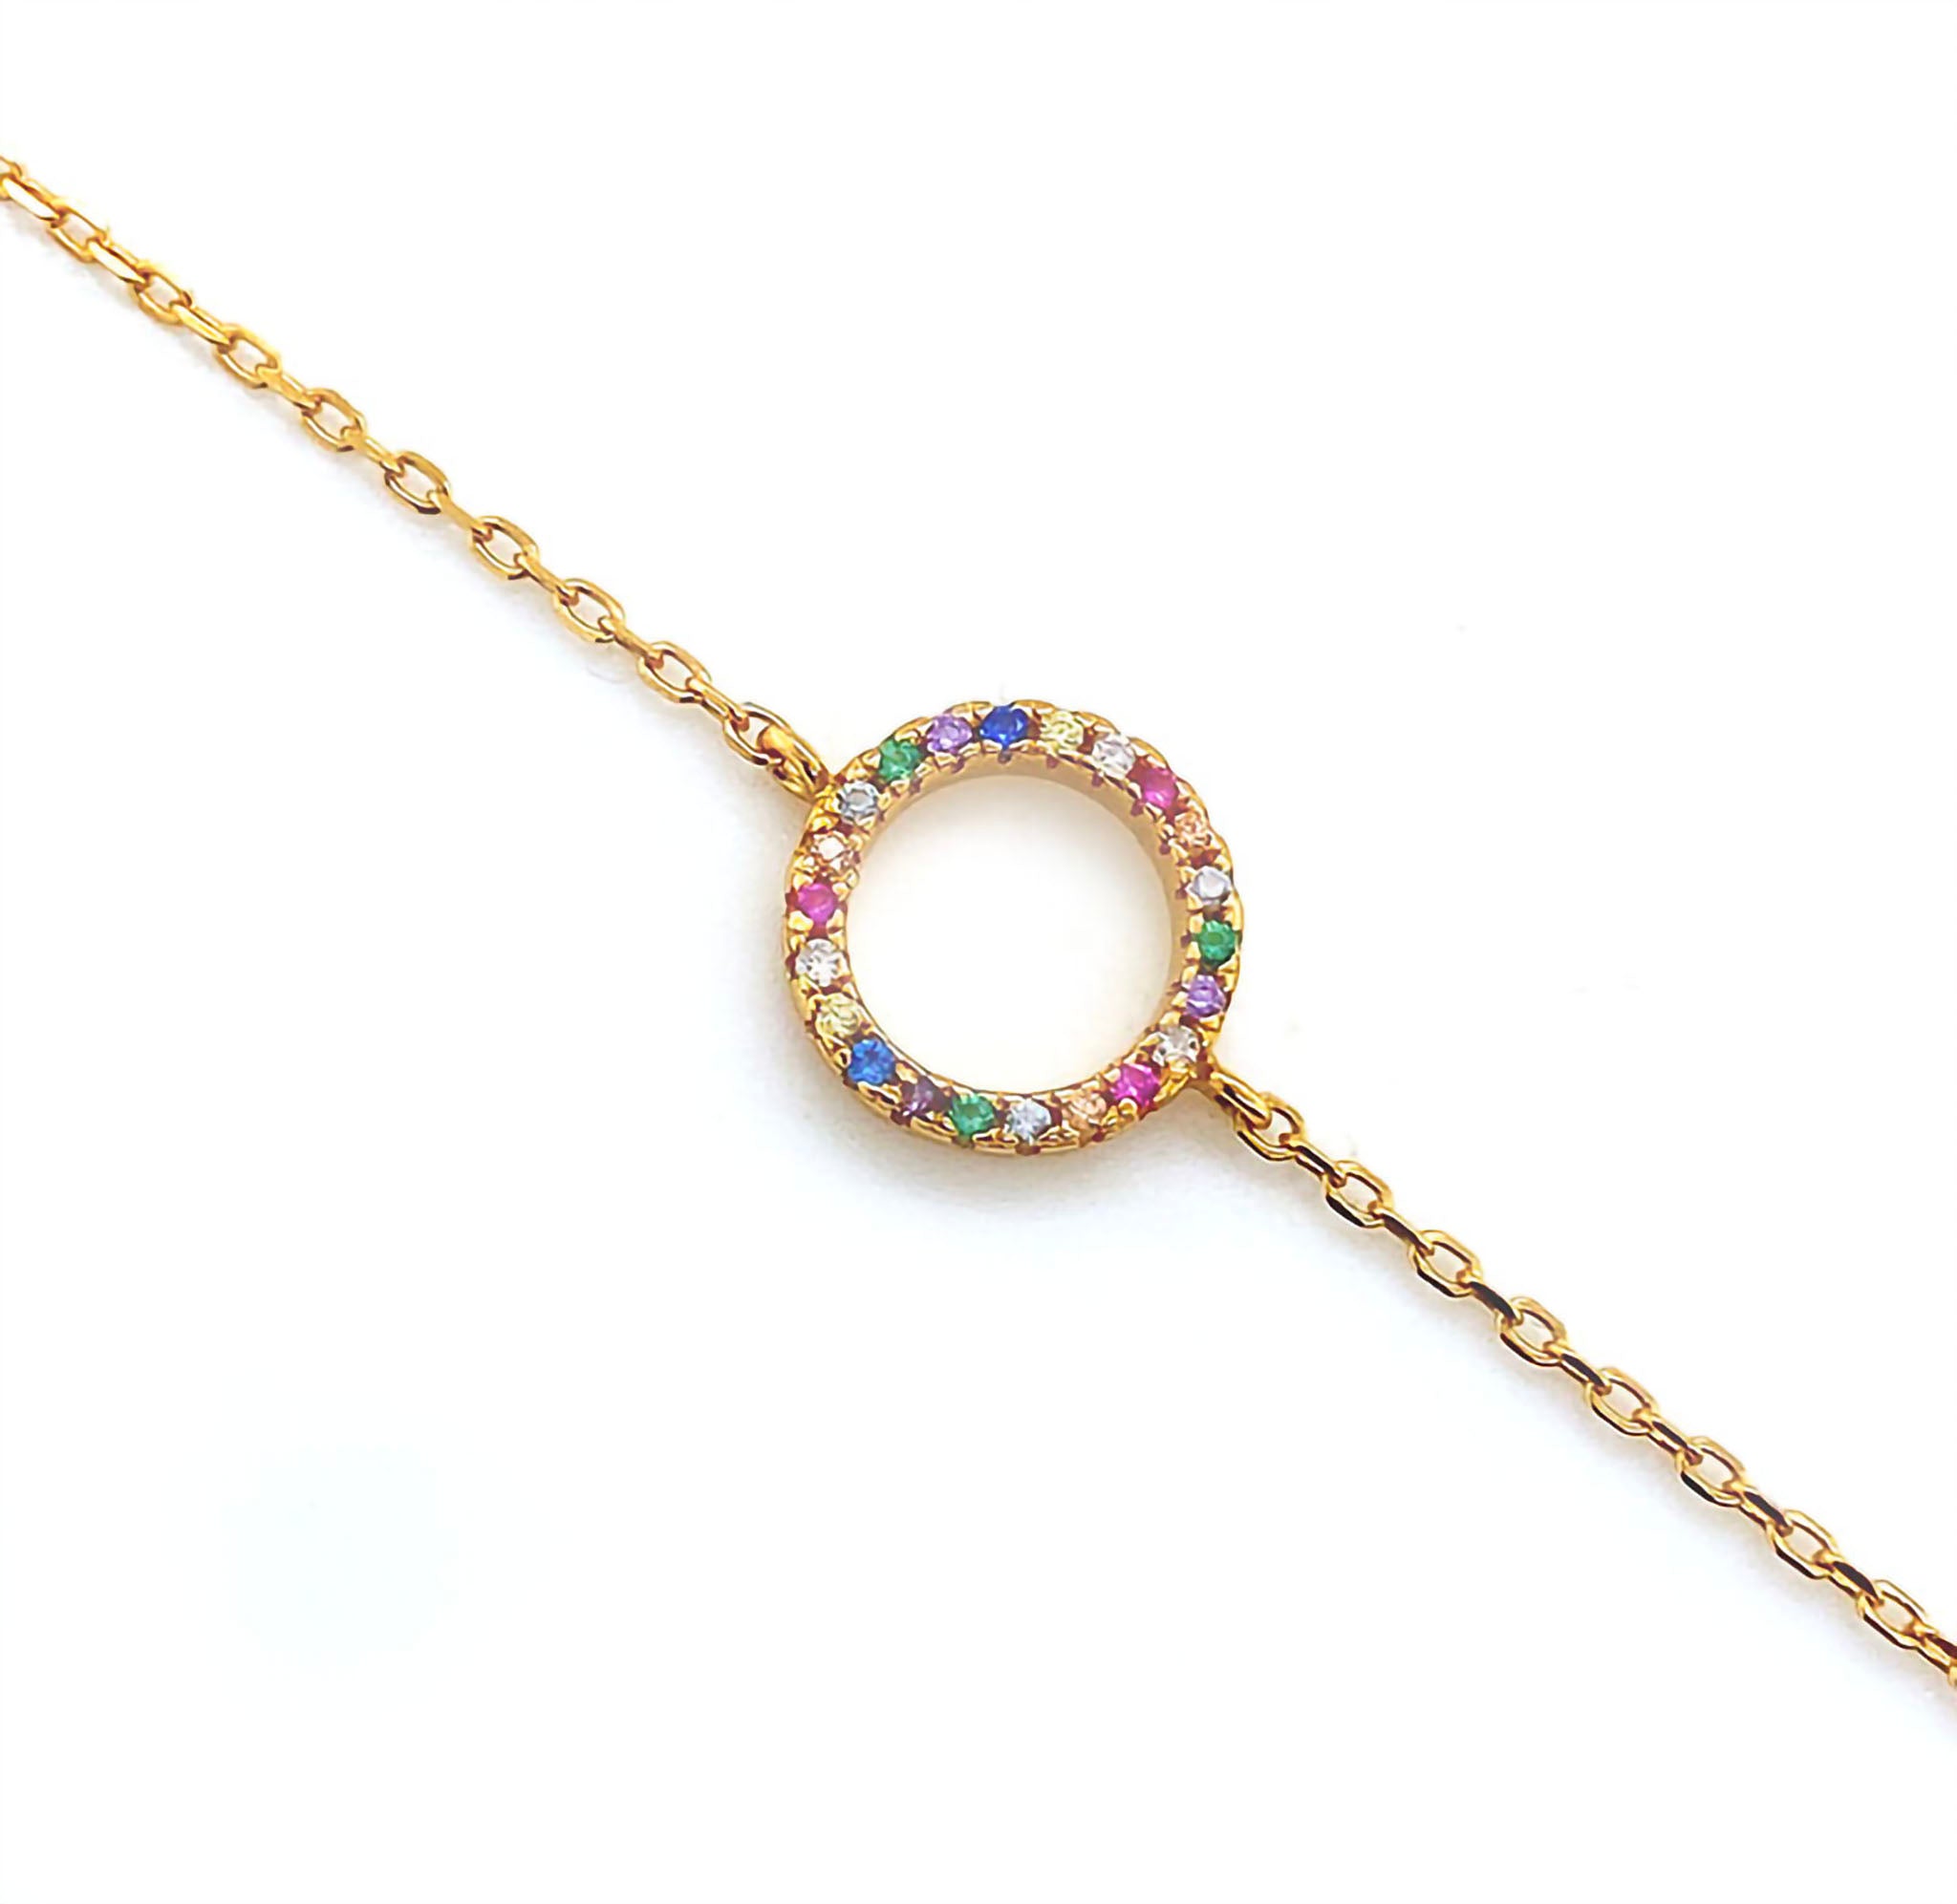 Crafted from 18ct gold vermeil, this bracelet features a halo of glistening multi-coloured stones. This delicate chain can be adjusted to your ideal fit. This bracelet has a rainbow circle in the centre with a dainty chain . Materials include 18ct Gold Vermeil (plated on sterling silver) and can be adjusted to 18 cm, 19 cm and 20 cm. This bracelet measures approx 21.5 cm in length . 